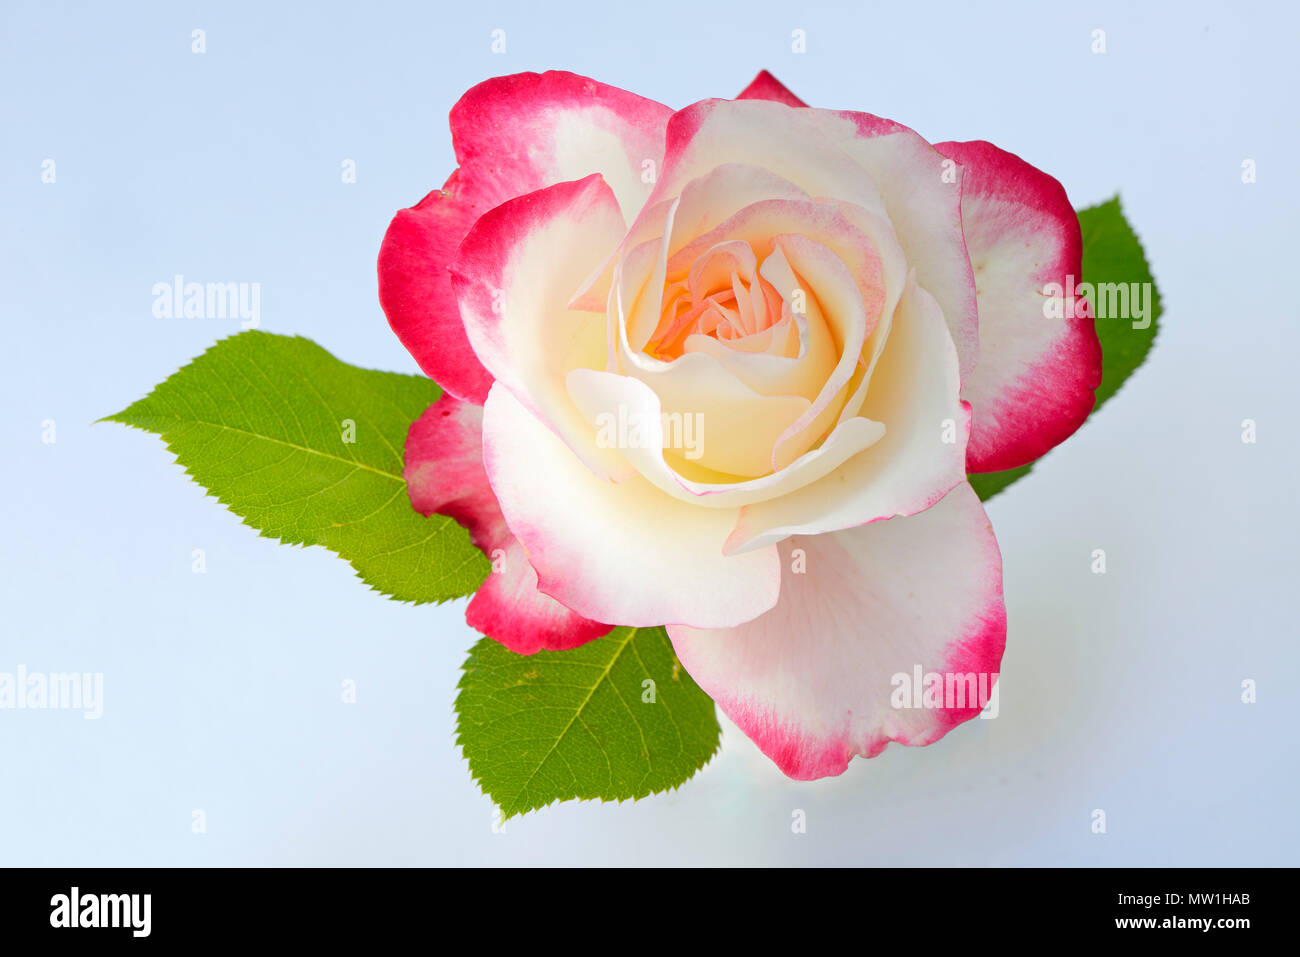 Garden rose (Rosa), flower with leaves, white background Stock Photo